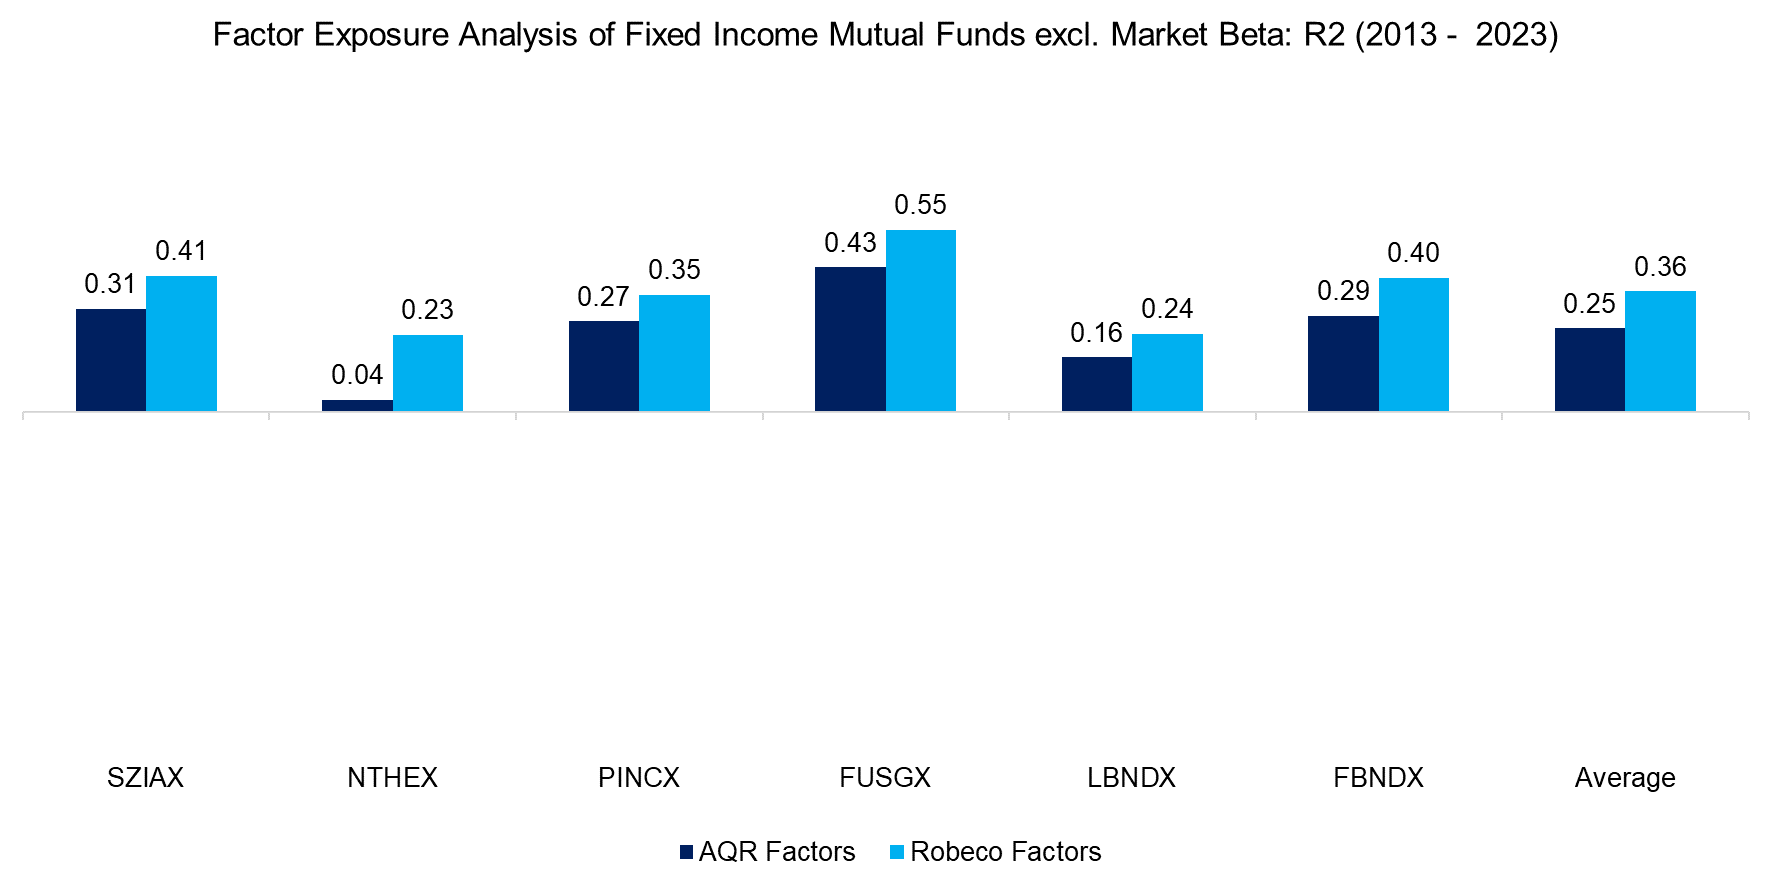 Factor Exposure Analysis of Fixed Income Mutal Funds excl. Market Beta R2 (2013 - 2023)